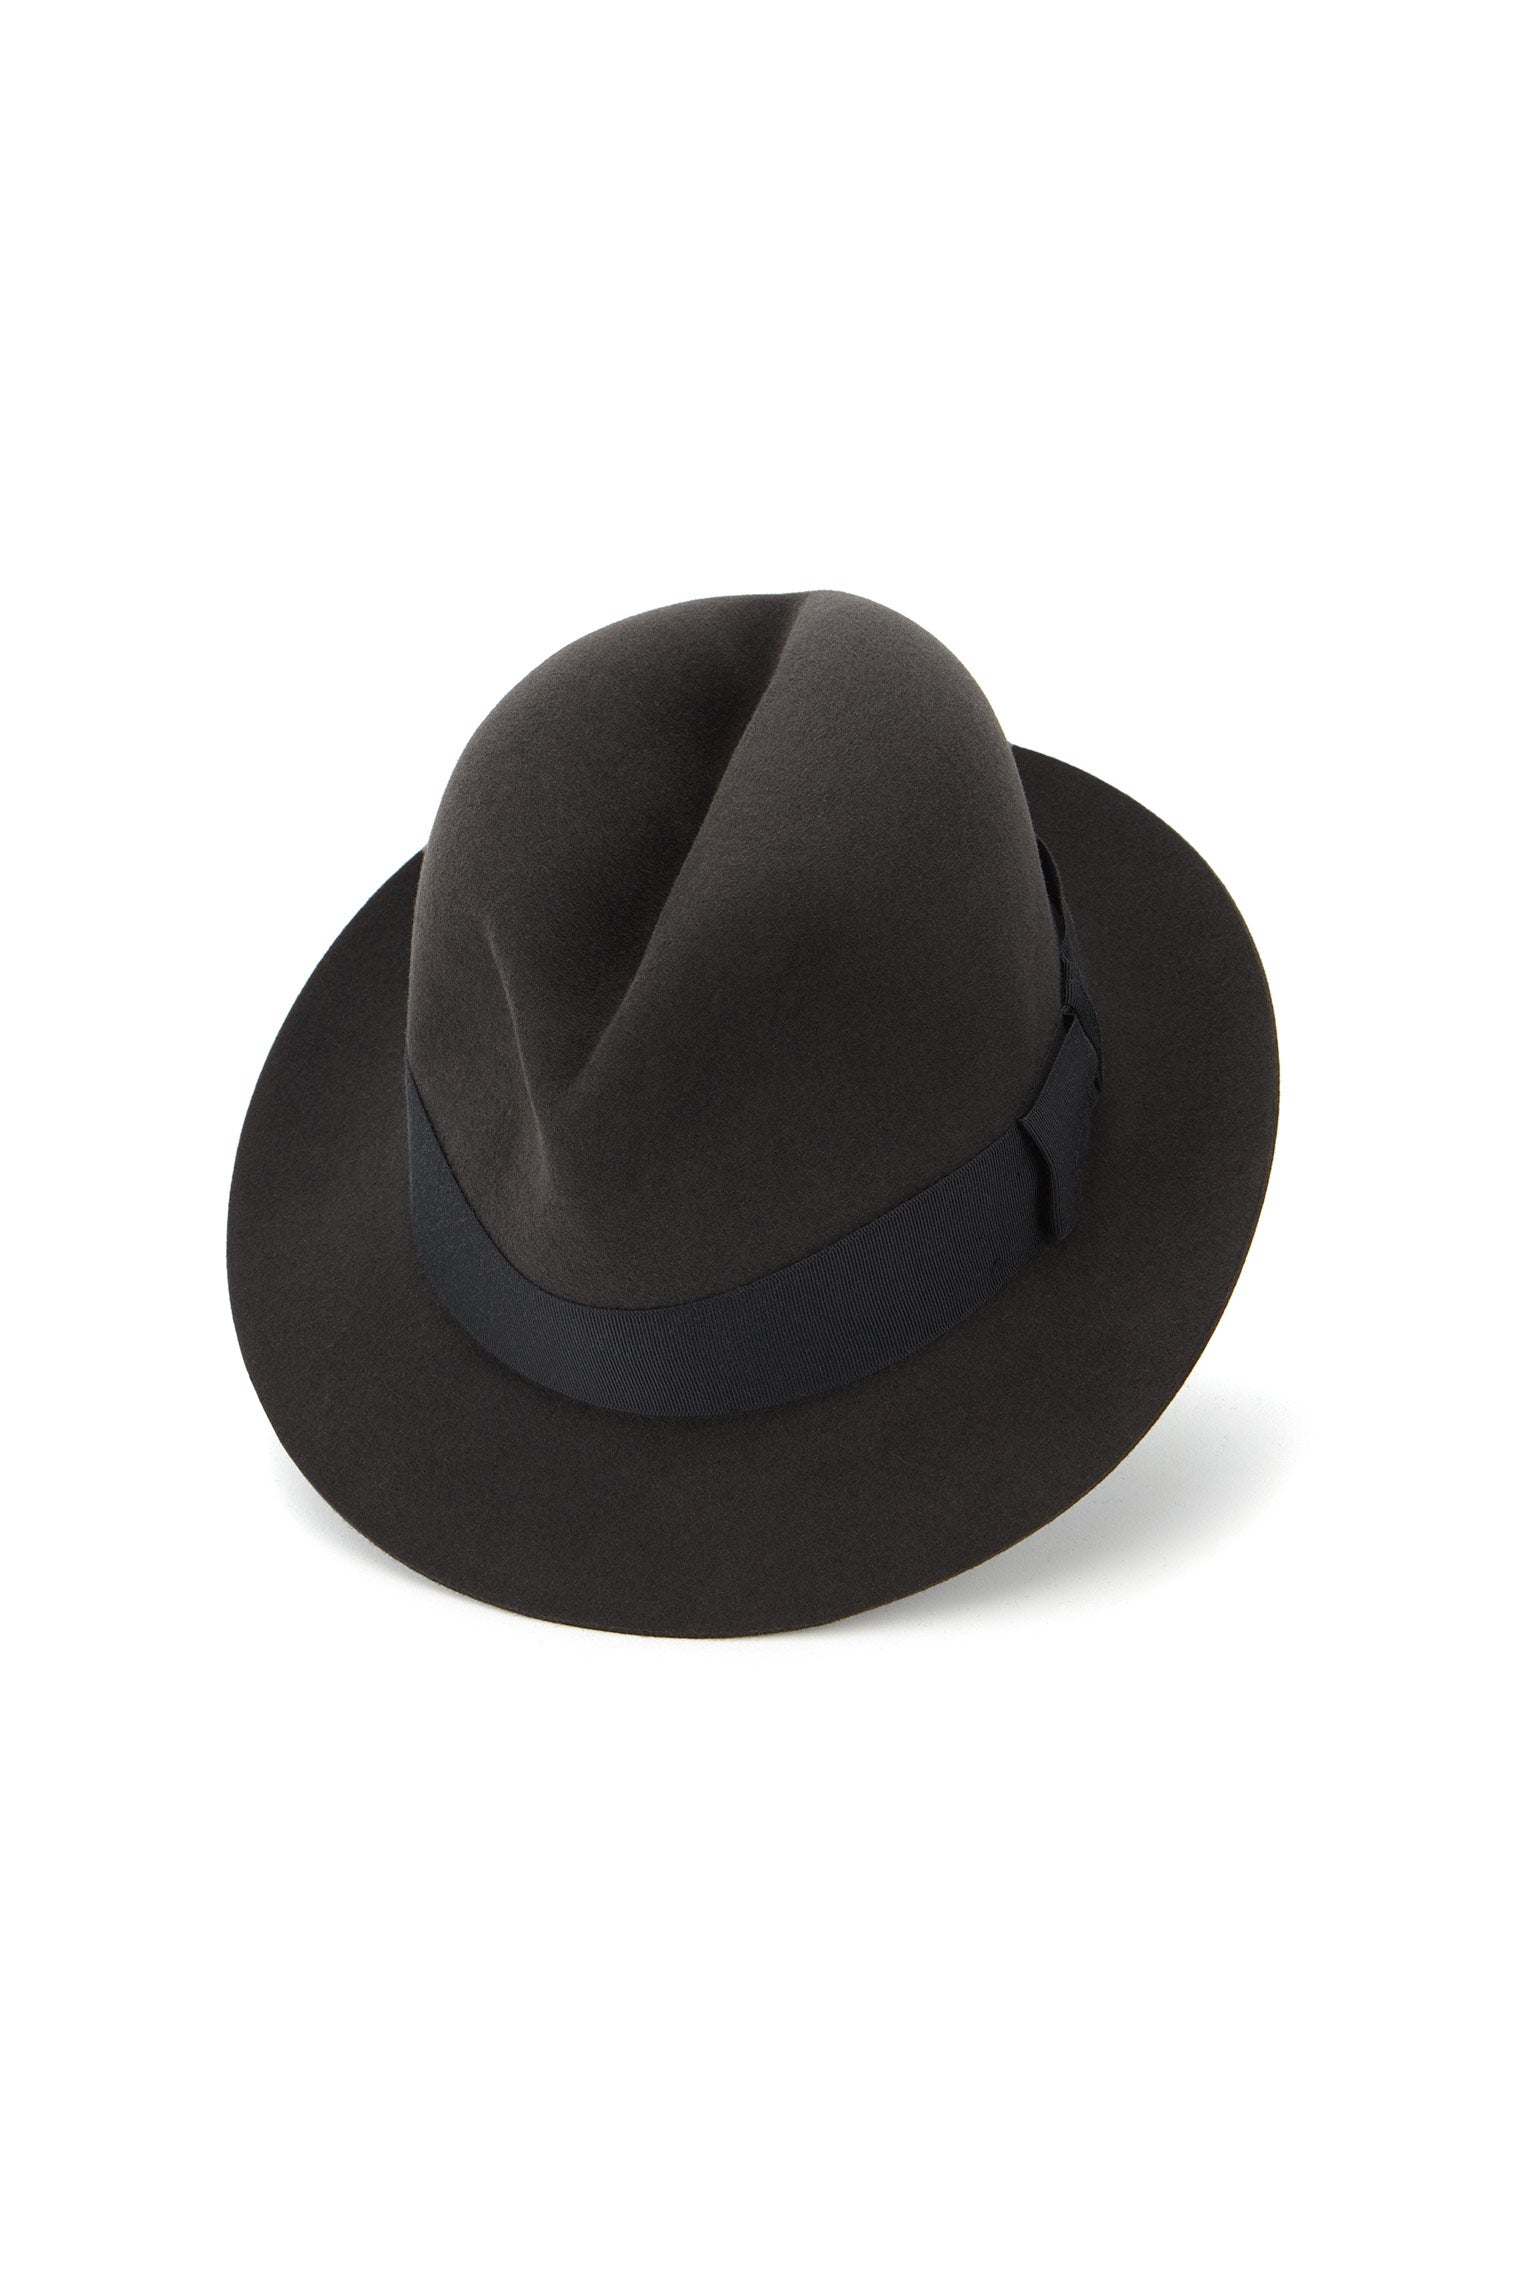 Madison Trilby - Men's Trilbies and Porkpies - Lock & Co. Hatters London UK